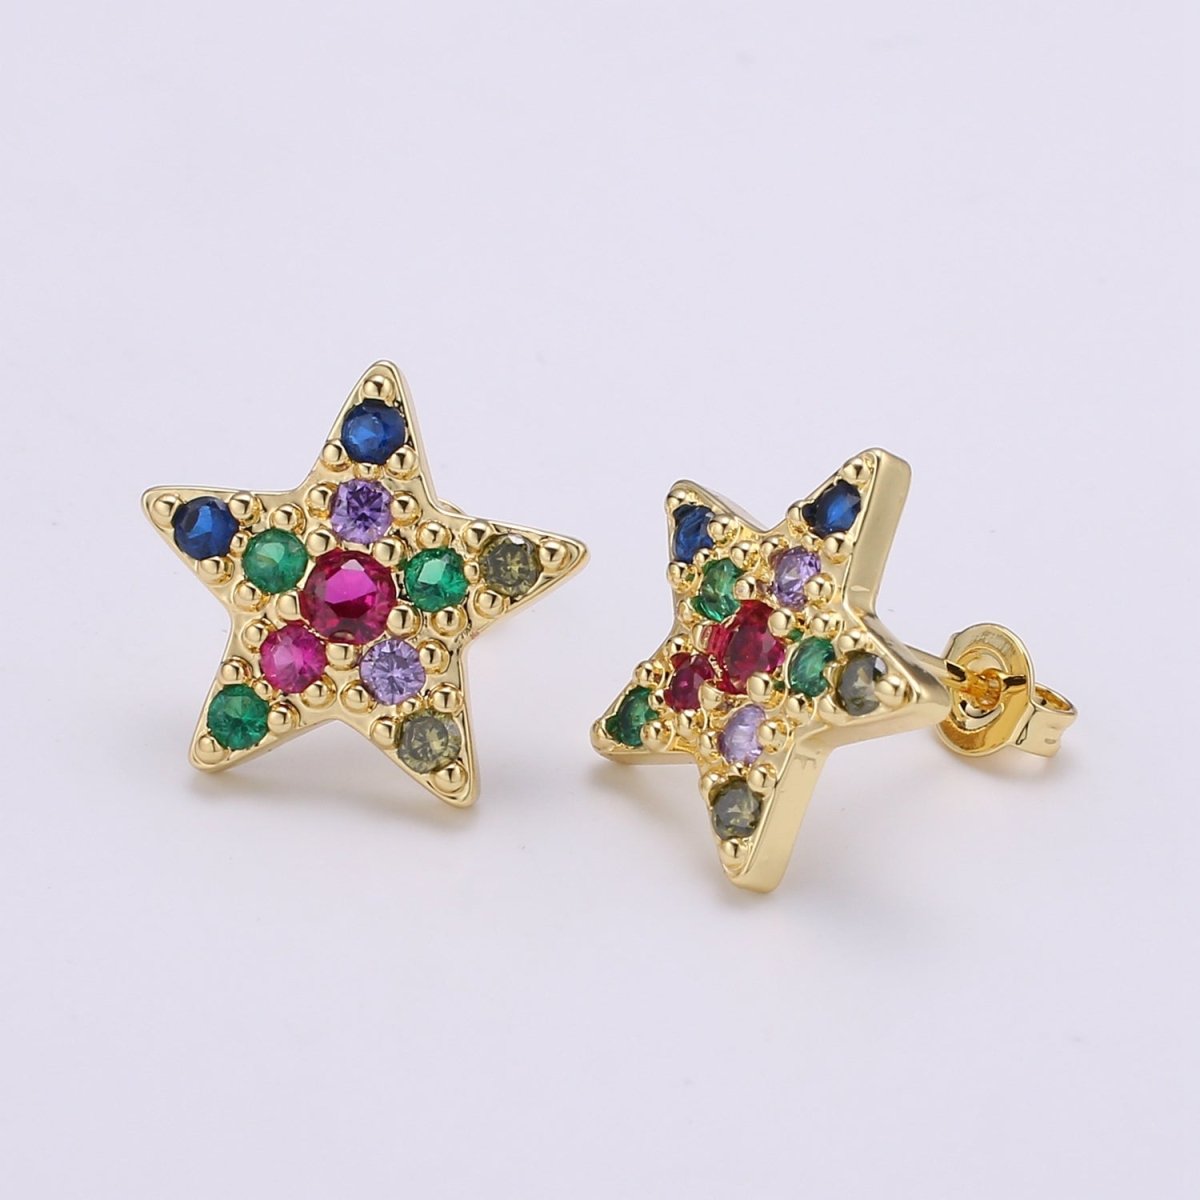 Star Design 24K Gold Plated Pave Cz Stud Earring,Match with charm CHGF-2050 for DIY Bracelet Craft Supply Jewelry Making Q-405 - DLUXCA